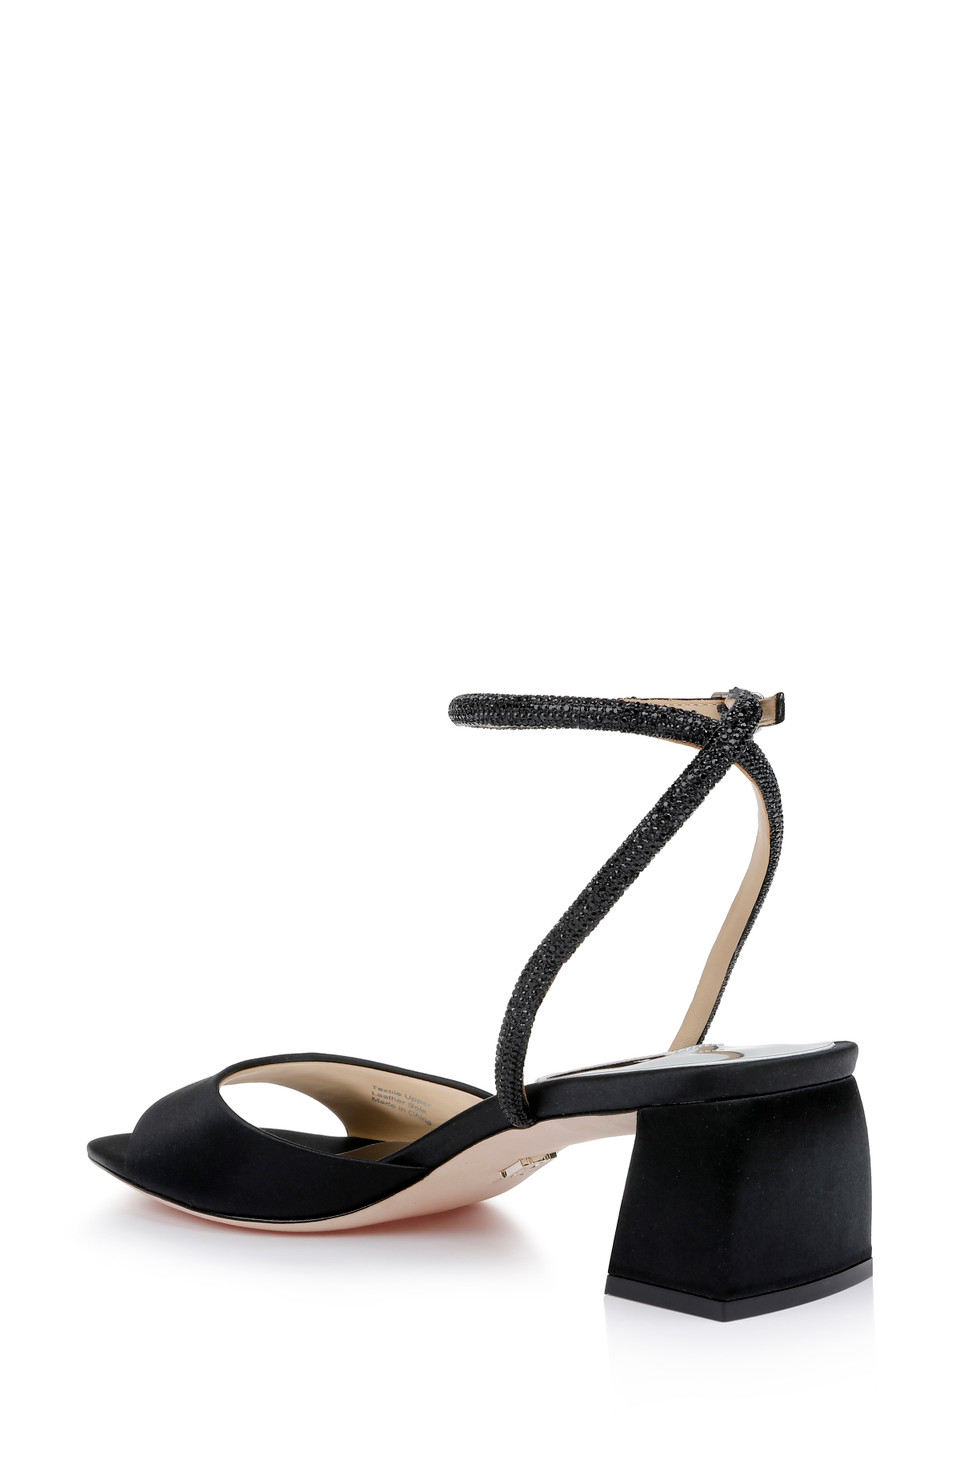 Infinity Satin Block Heels with Ankle Strap by Badgley Mishcka